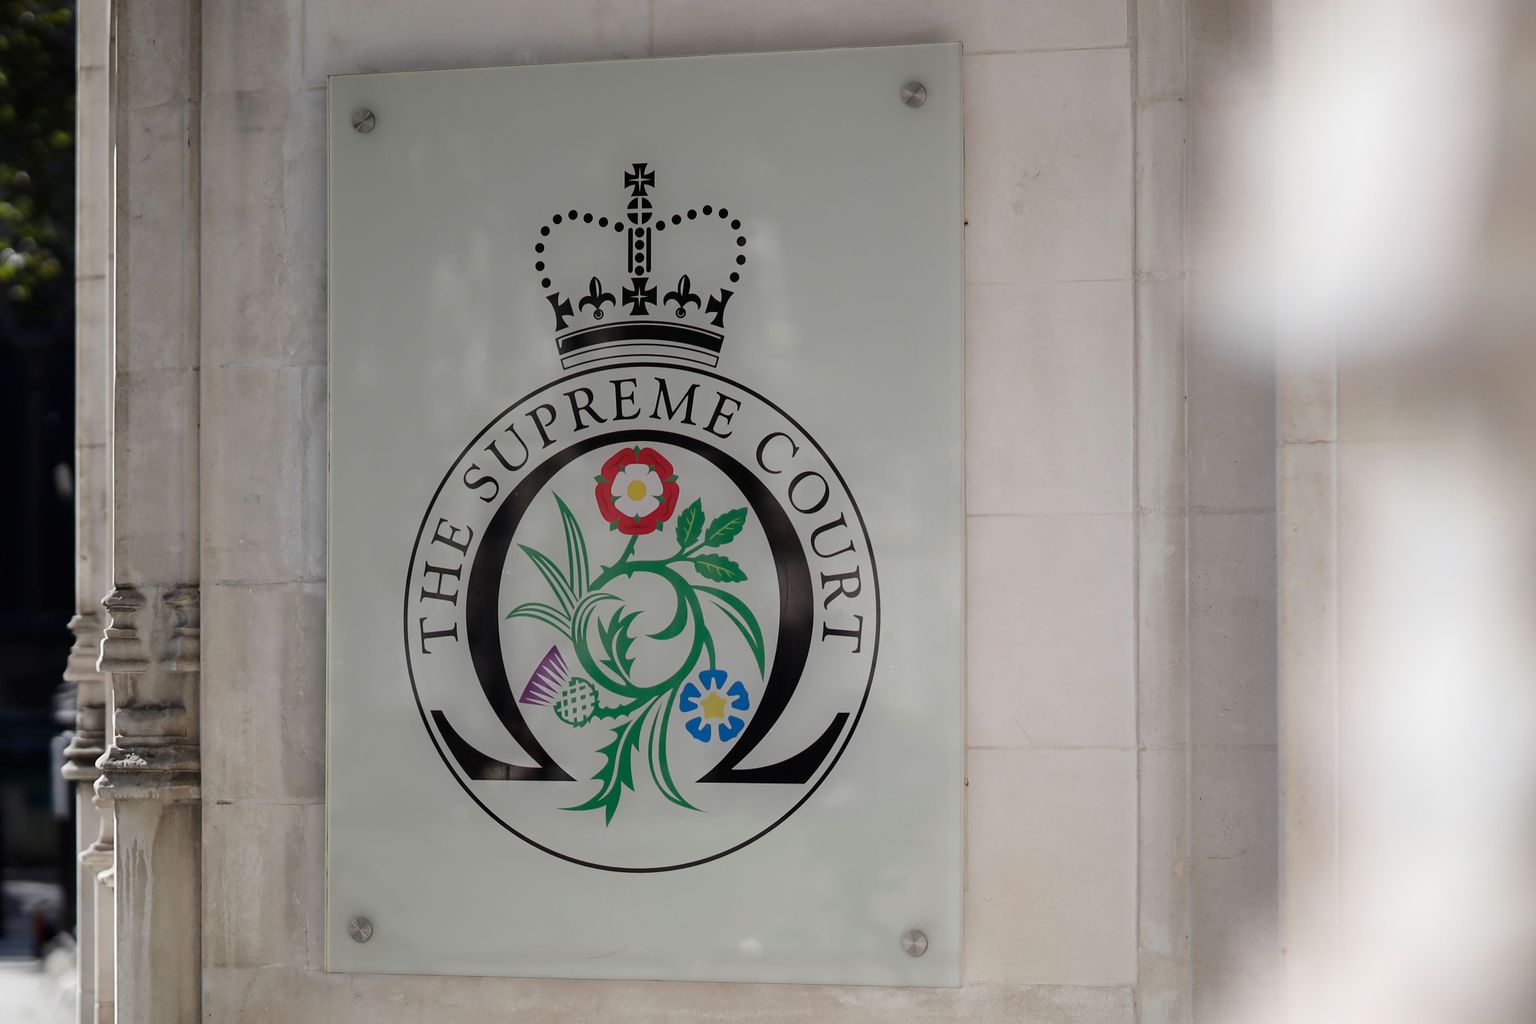 The logo for the Supreme court at the entrance to the court in central London on the third and final day of the hearing into the decision by the government to prorogue parliament on September 19, 2019. (Photo by Tolga Akmen / AFP)